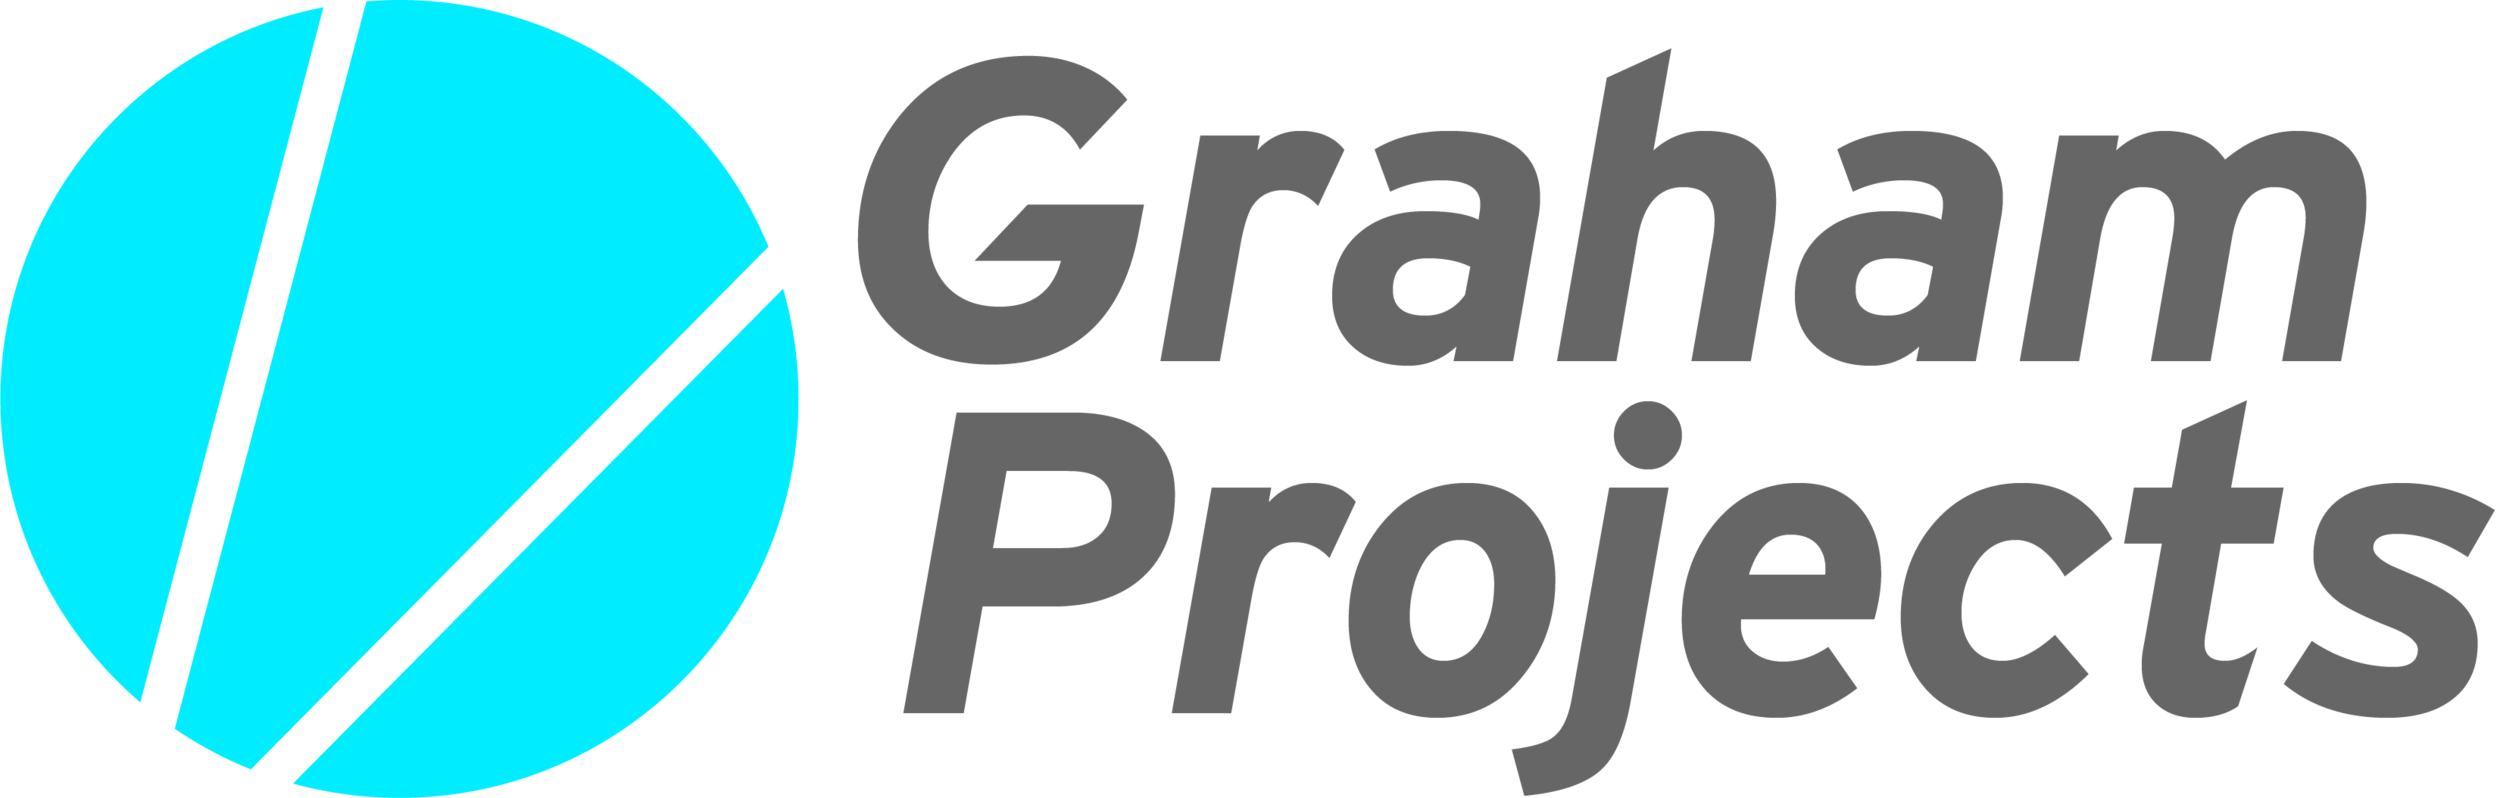 Graham-Projects-logo-3300px.png